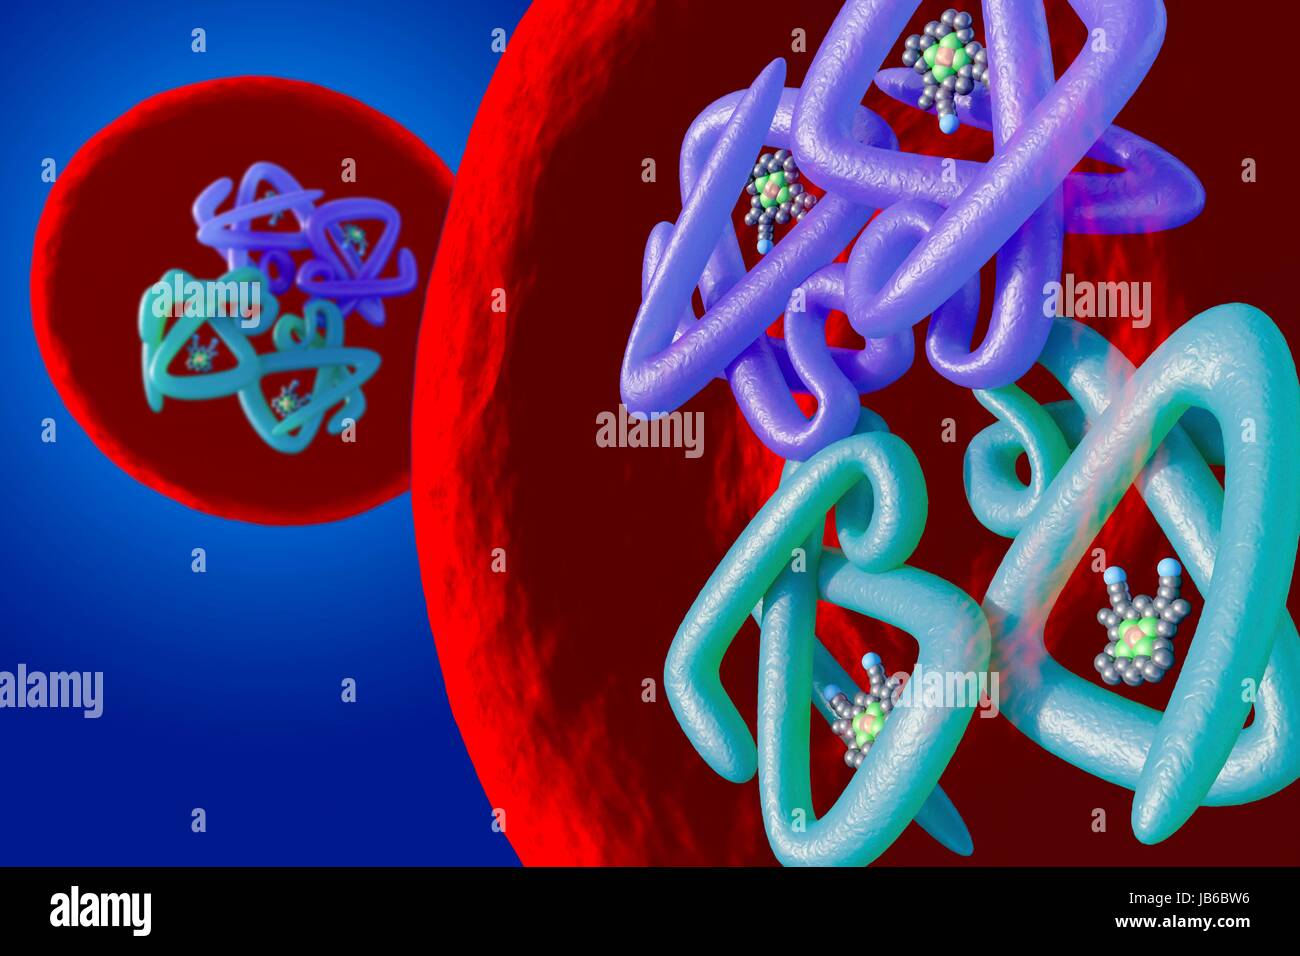 Red blood cell structure, illustration. Haemoglobin molecule inside a red blood cell. Stock Photo